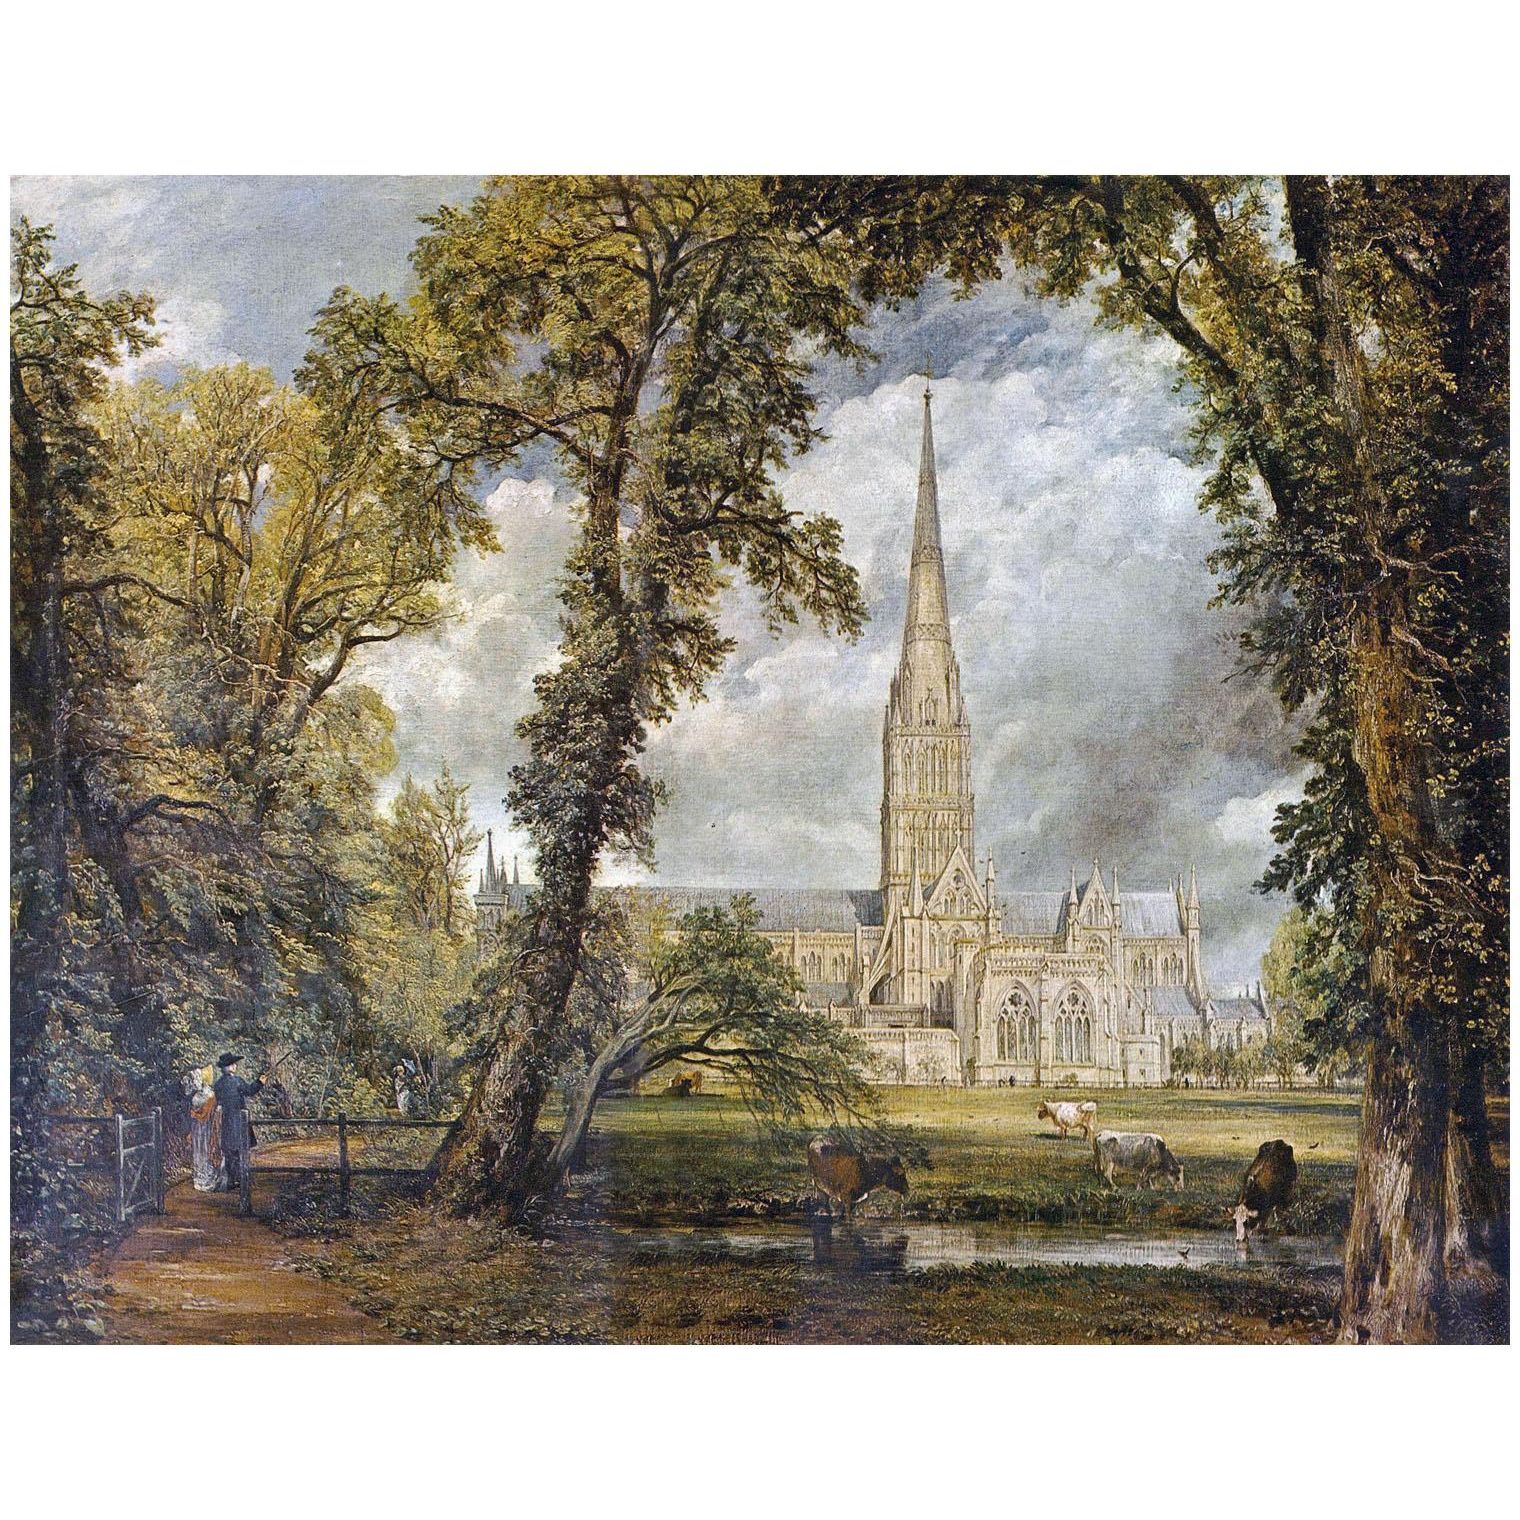 John Constable. Salisbury Cathedral. 1823. Victoria and Albert Museum